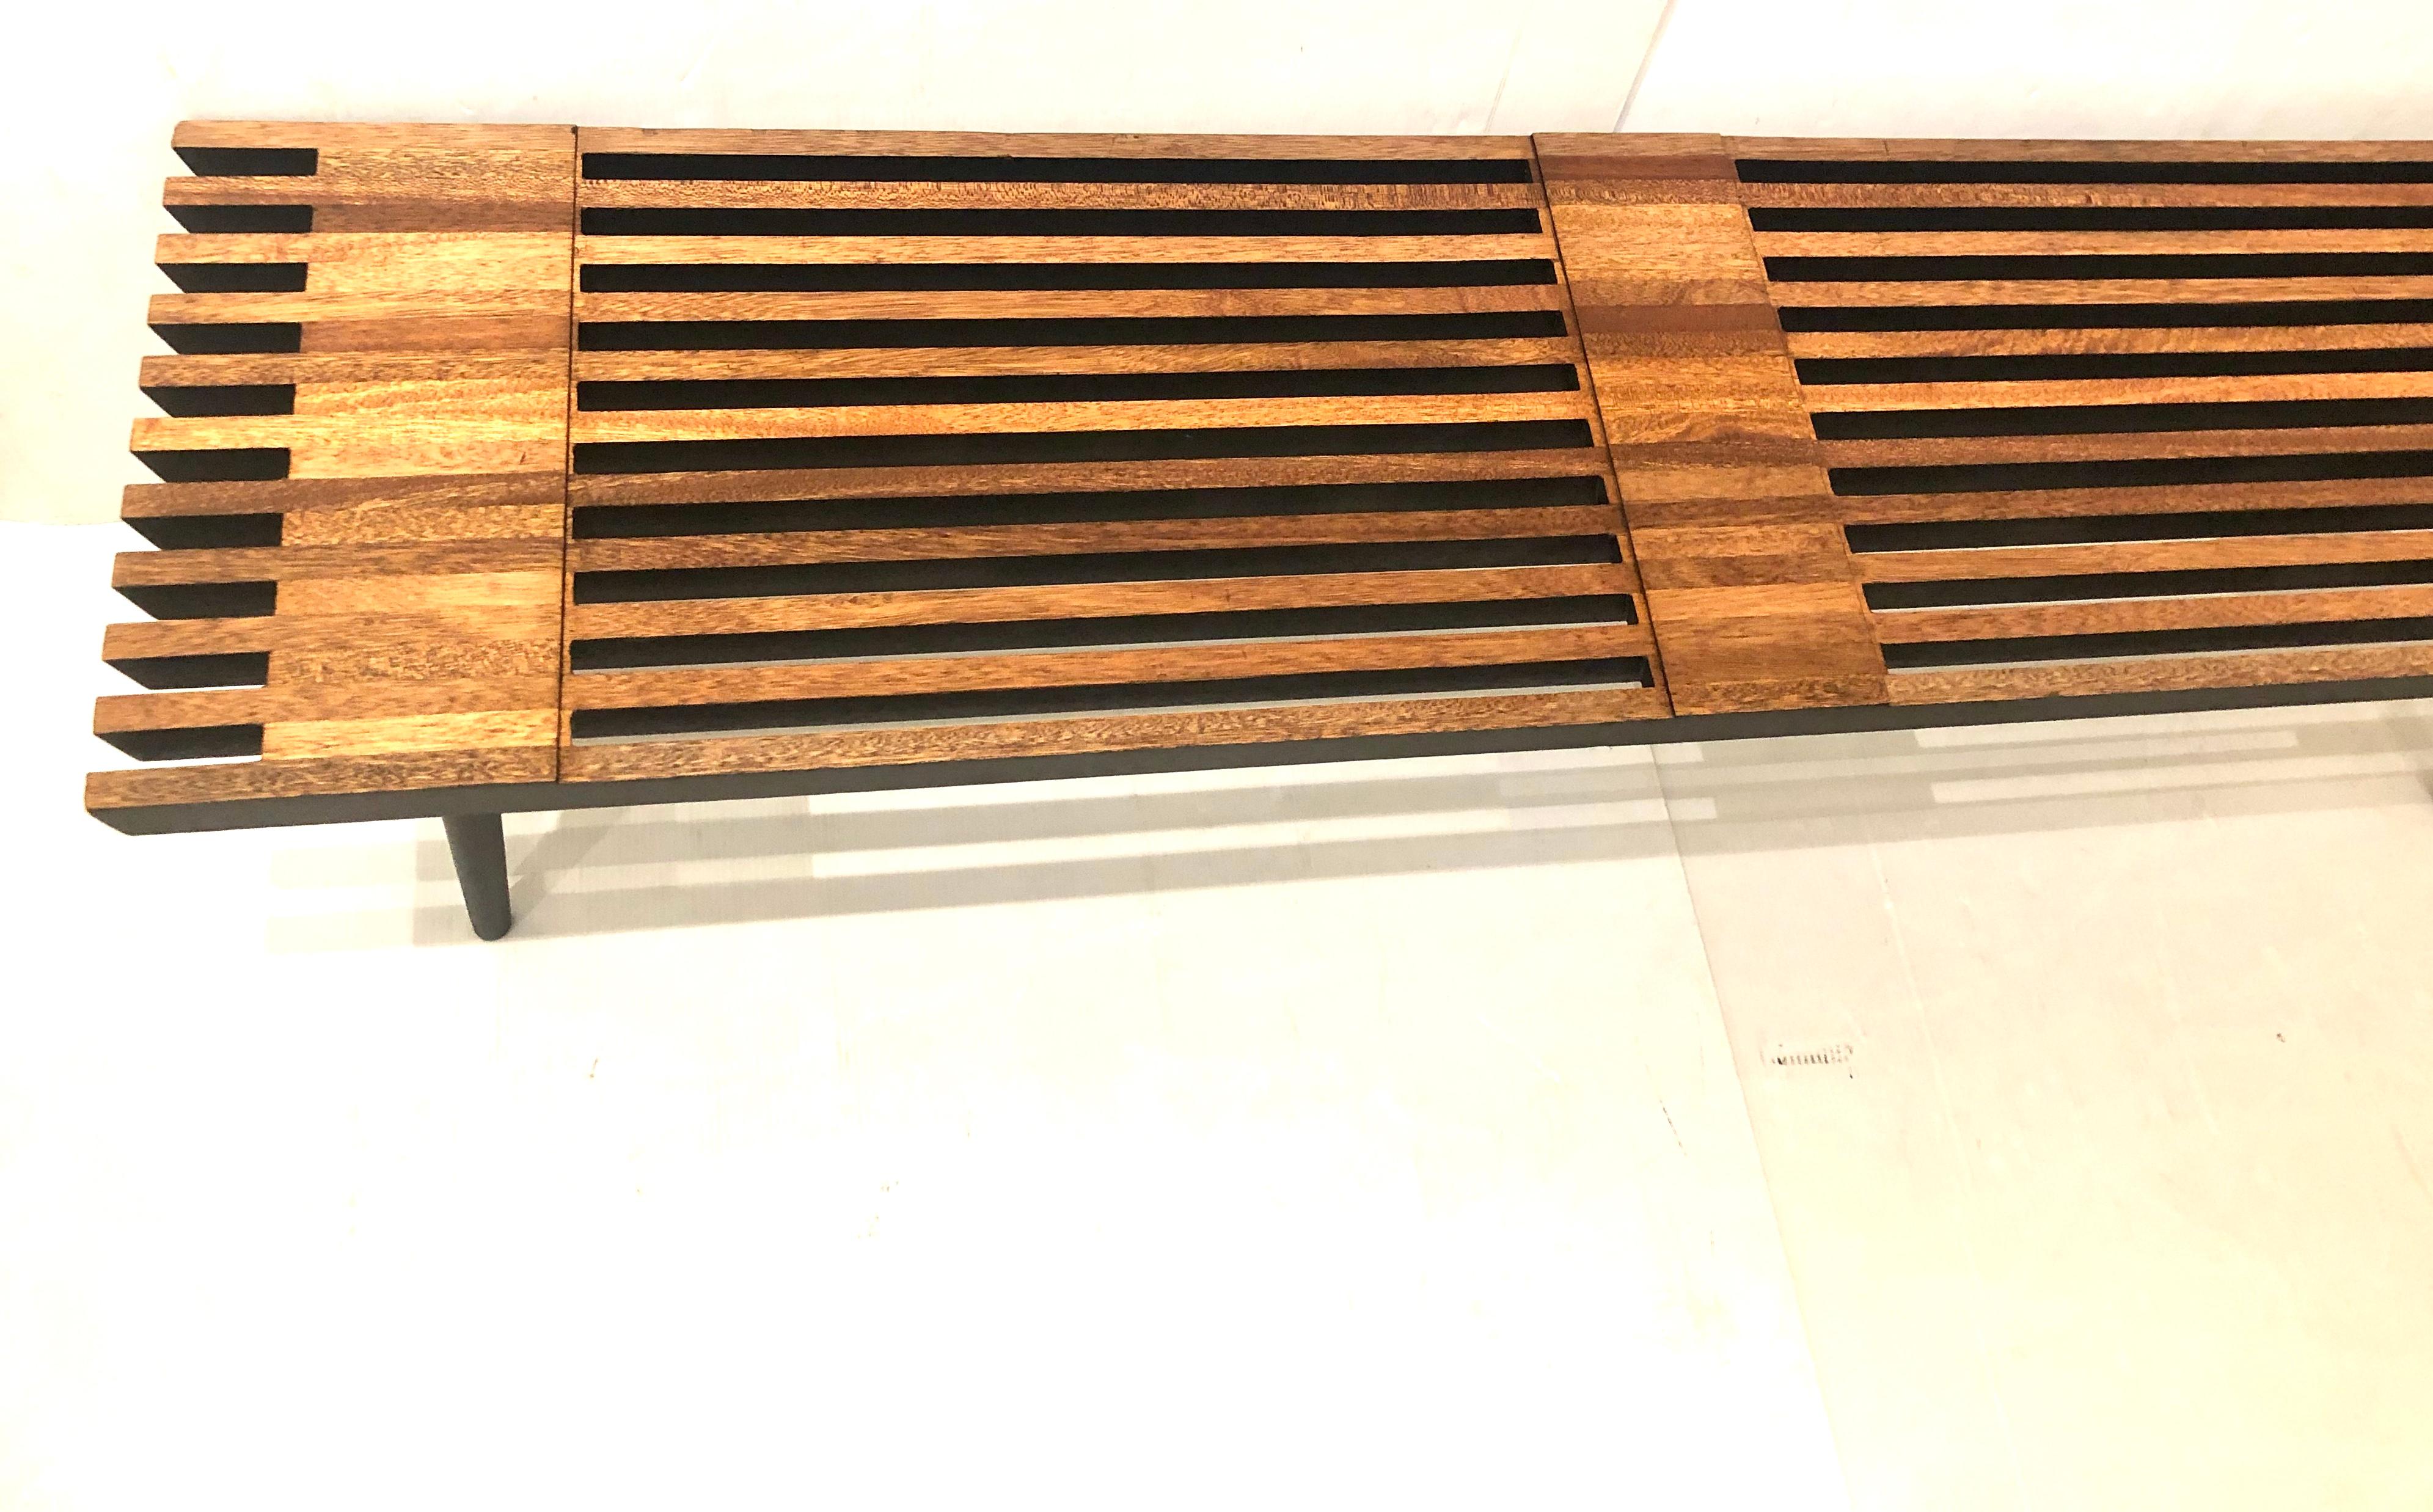 Elegant Japanese style small slat bench, circa 1950s, freshly refinished in solid mahogany with black painted finish. The piece is solid and sturdy with tapered legs that can be removed for easy storage or shipping. Nice angle edge end cut; can be